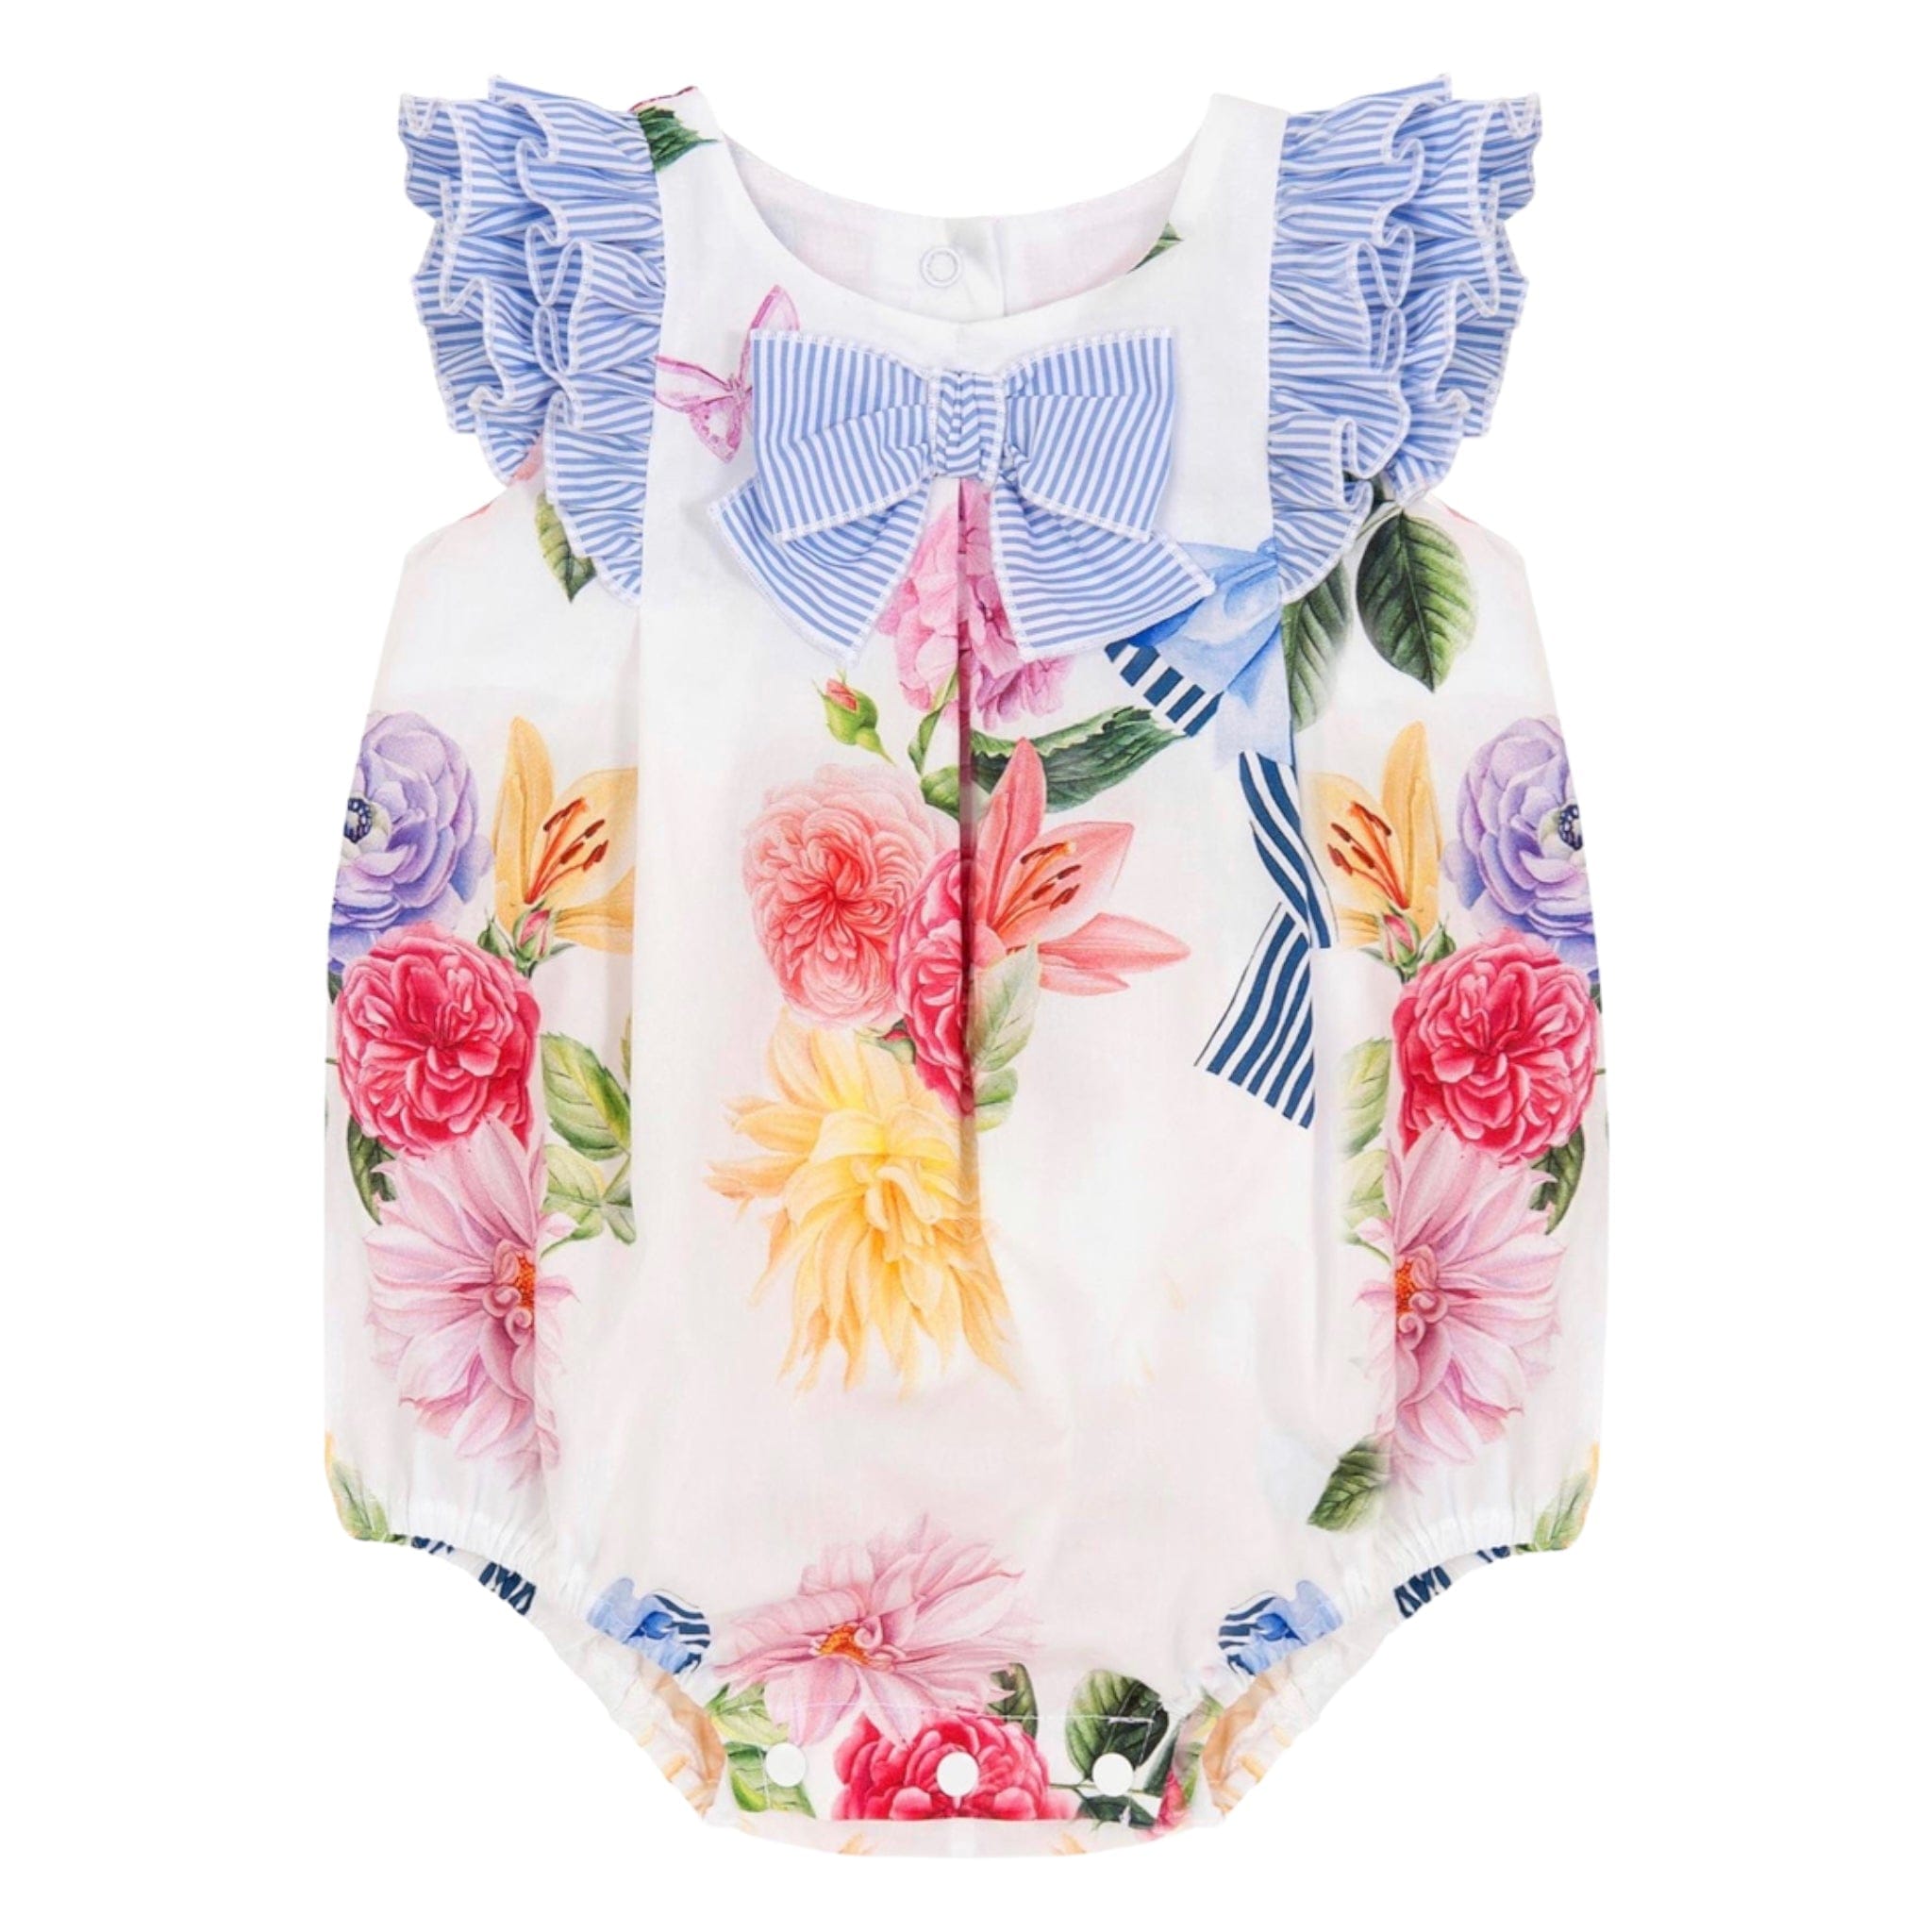 Balloon Chic White Floral Baby Romper